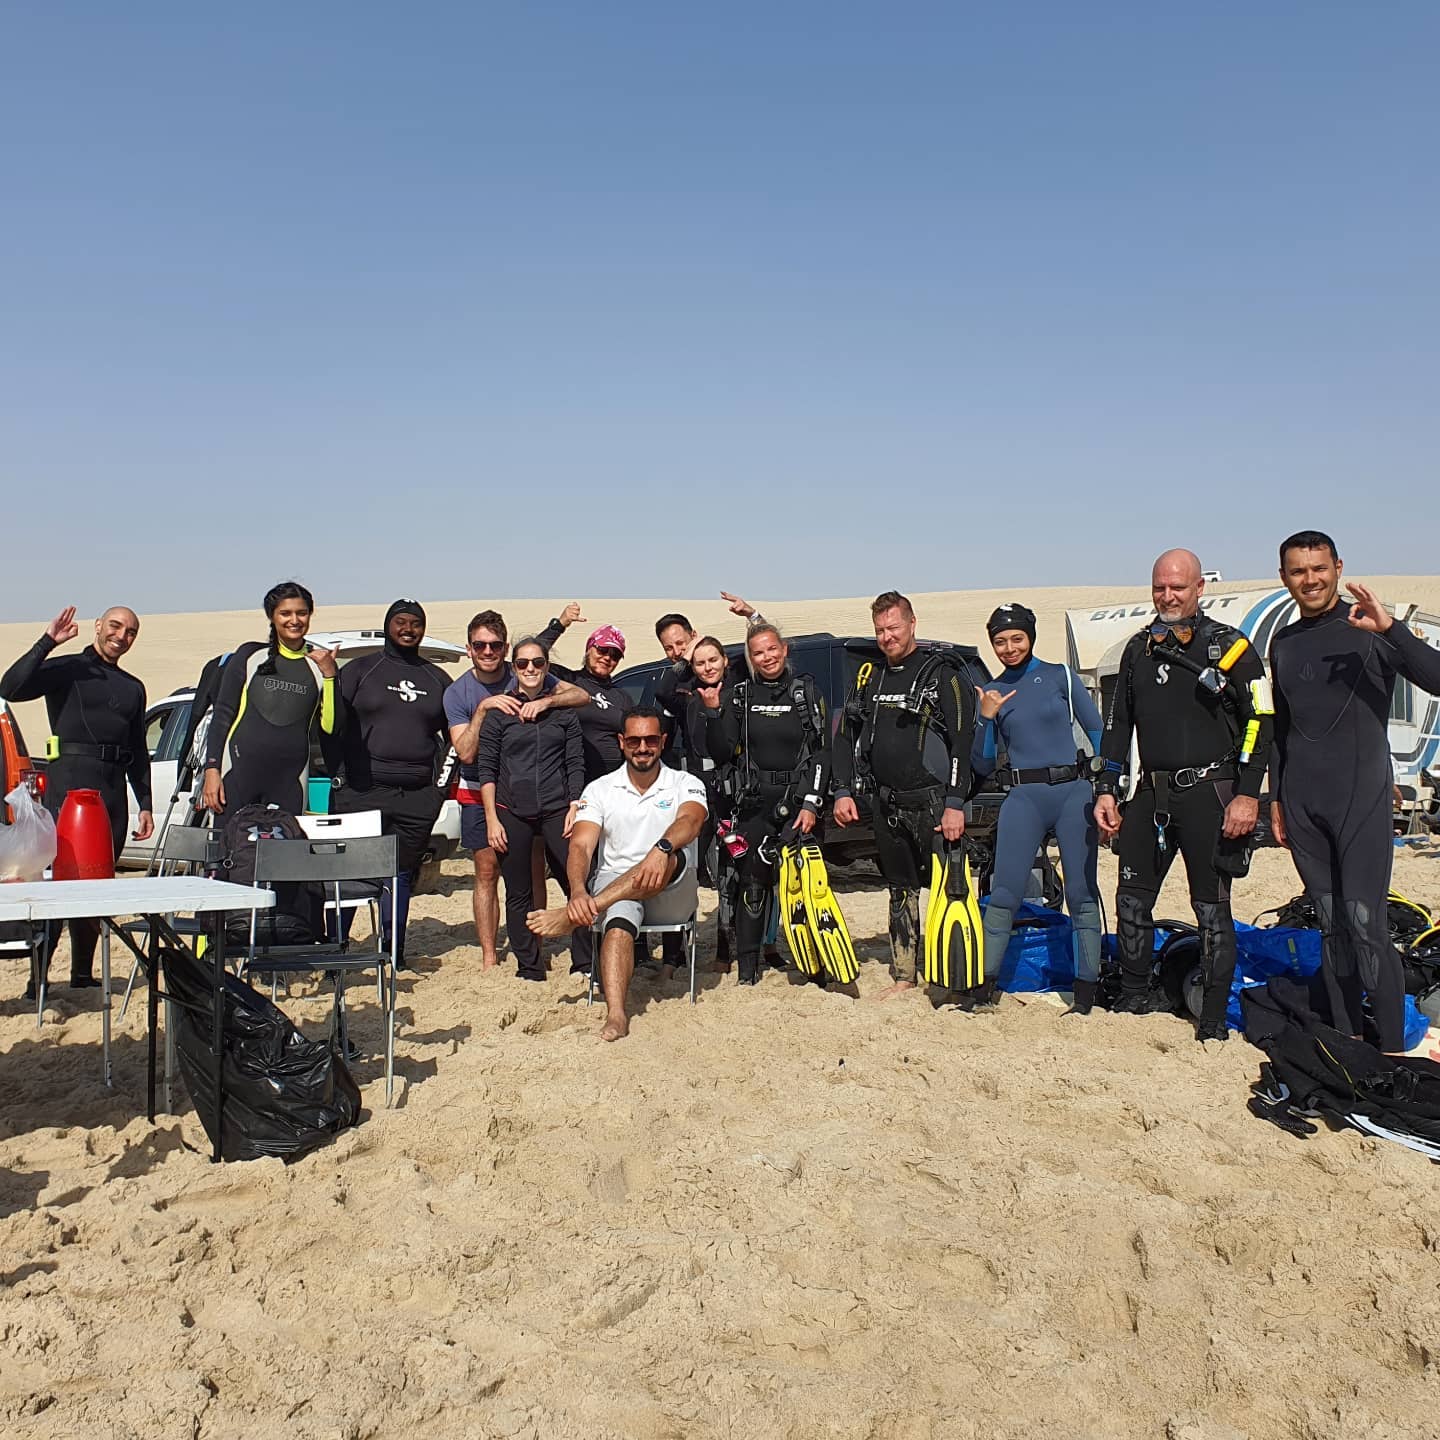 Week has passed already since the last weekend
Are you ready for the coming one?
طار الأسبوع ودخل علينا الويك اند
#scuba
#scubadiving #divinginqatar